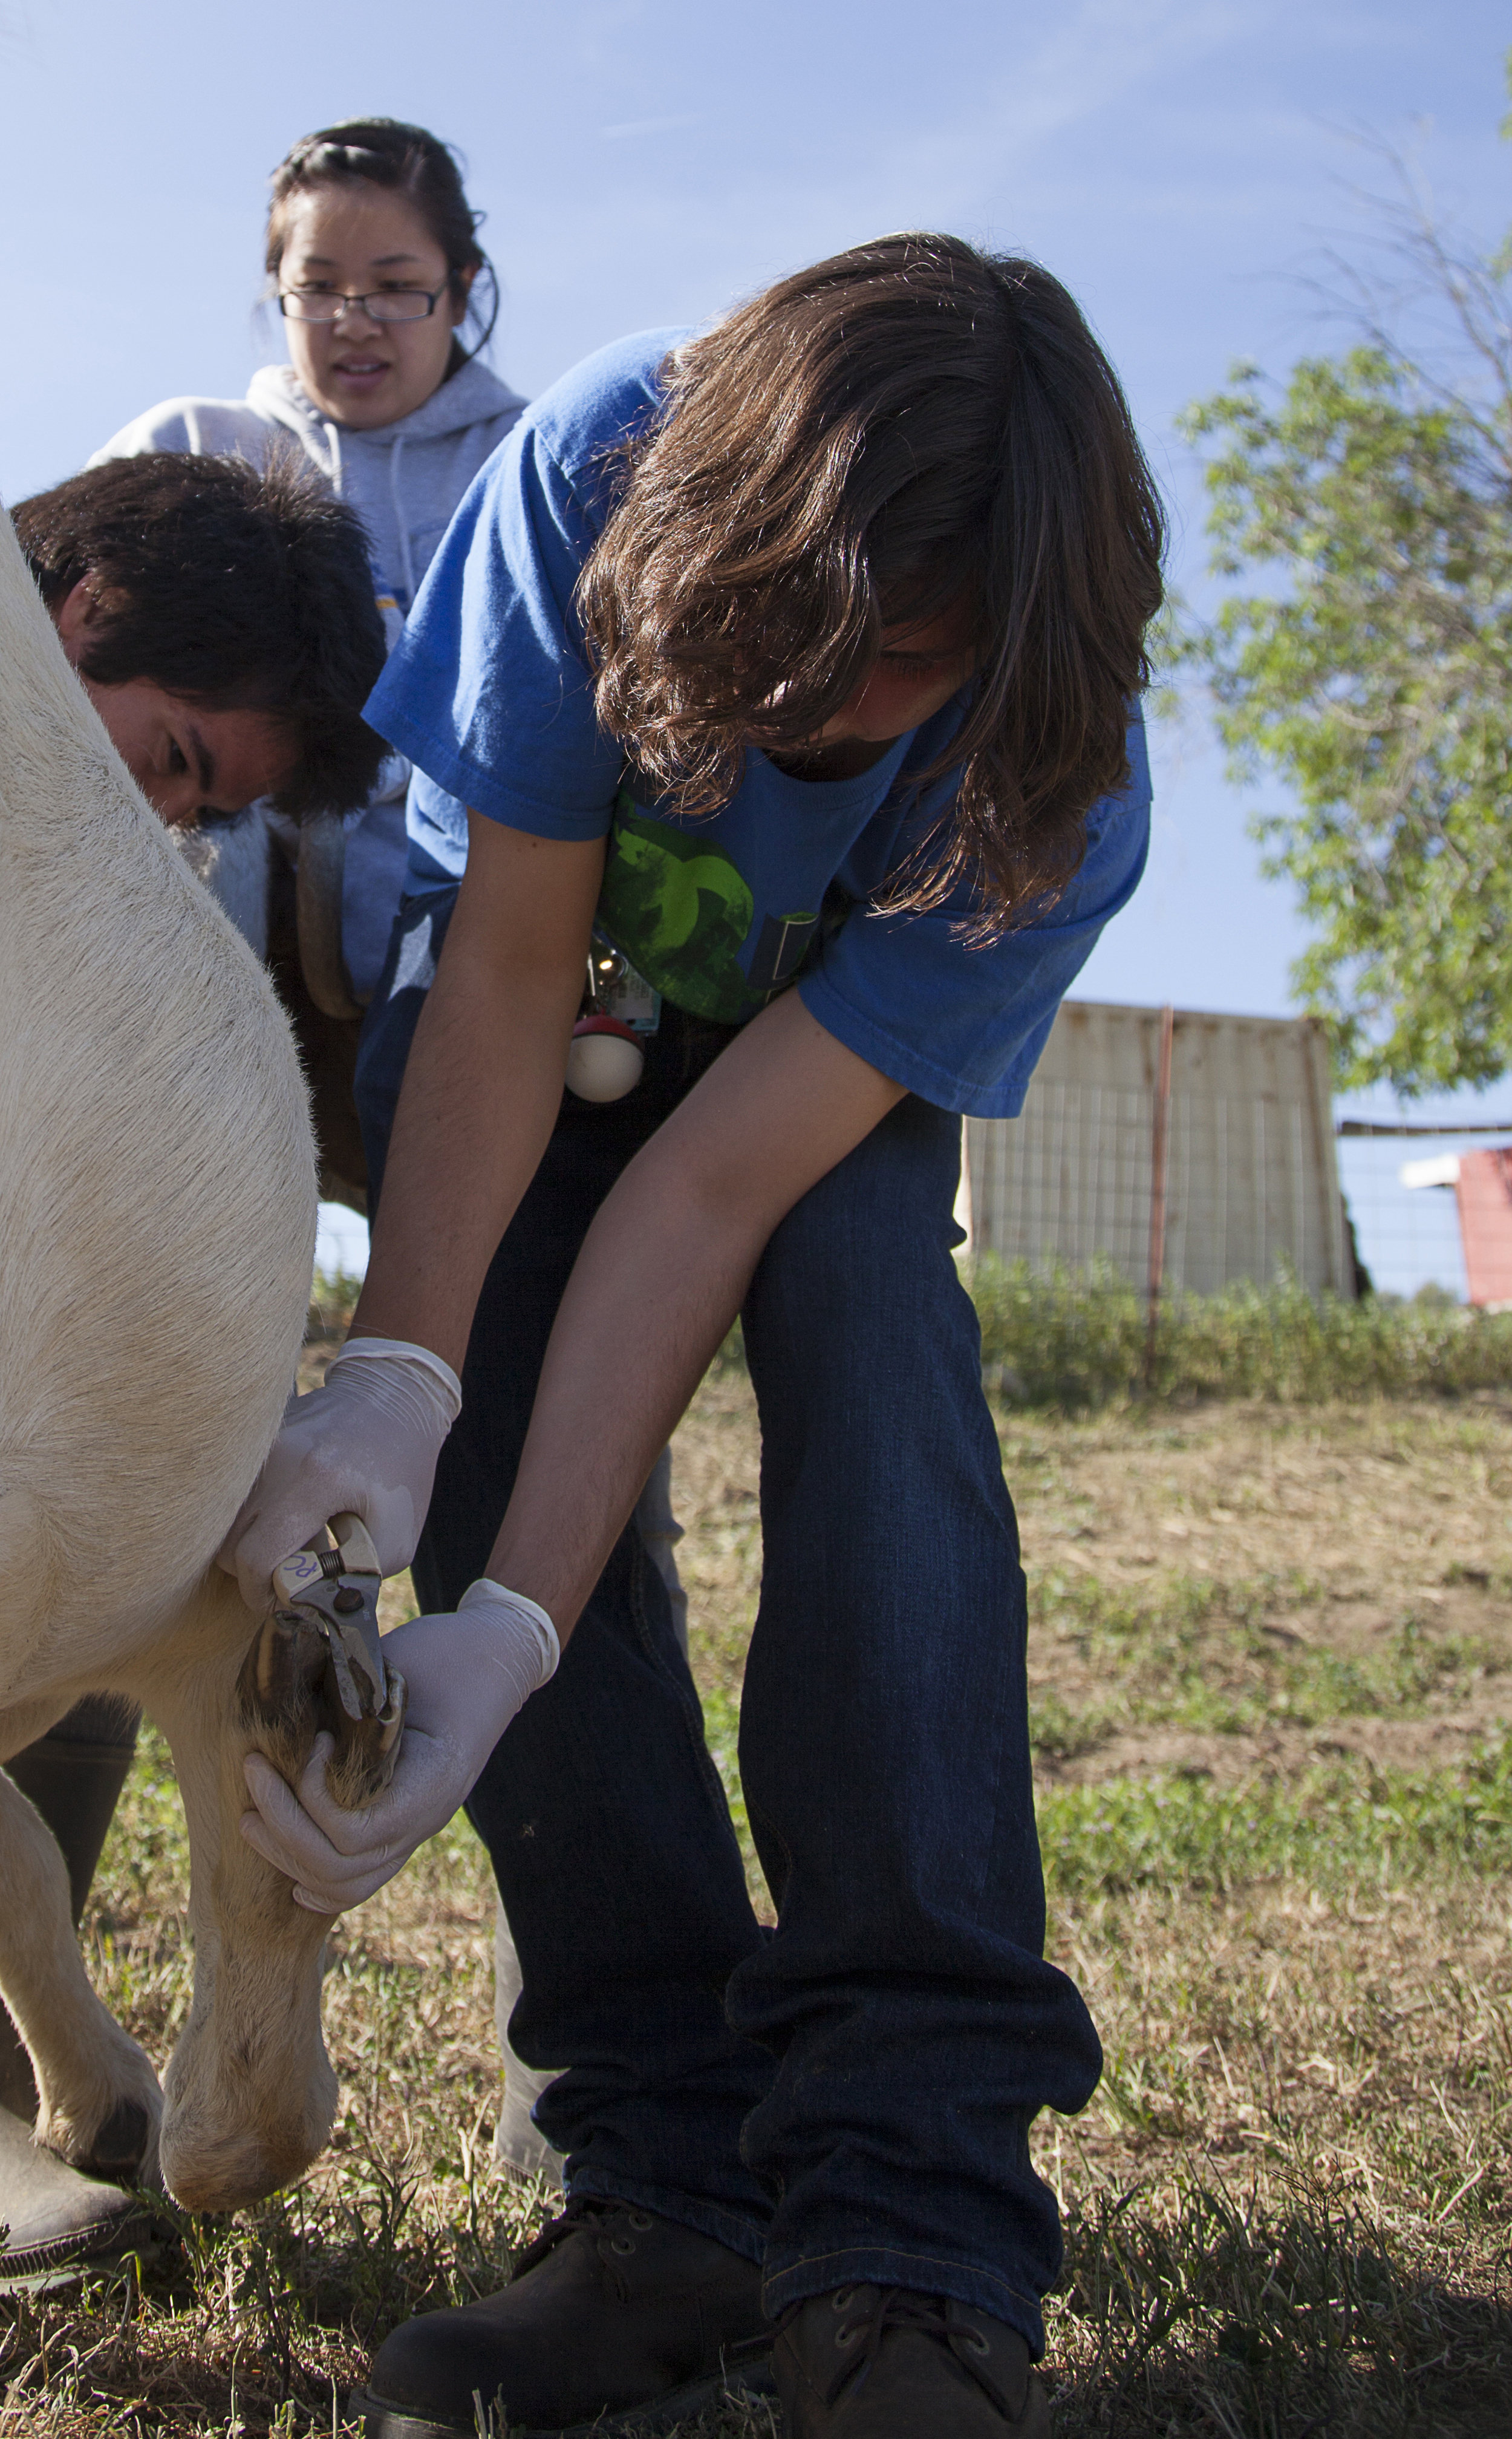  Pre-vet major Ivan Barraza clips and trims the hoof of Flag, the goat, during a routine physical examination at the Pierce farm on Friday, March 20, 2015. Woodland Hills, Calif.  Read the full story&nbsp; here  